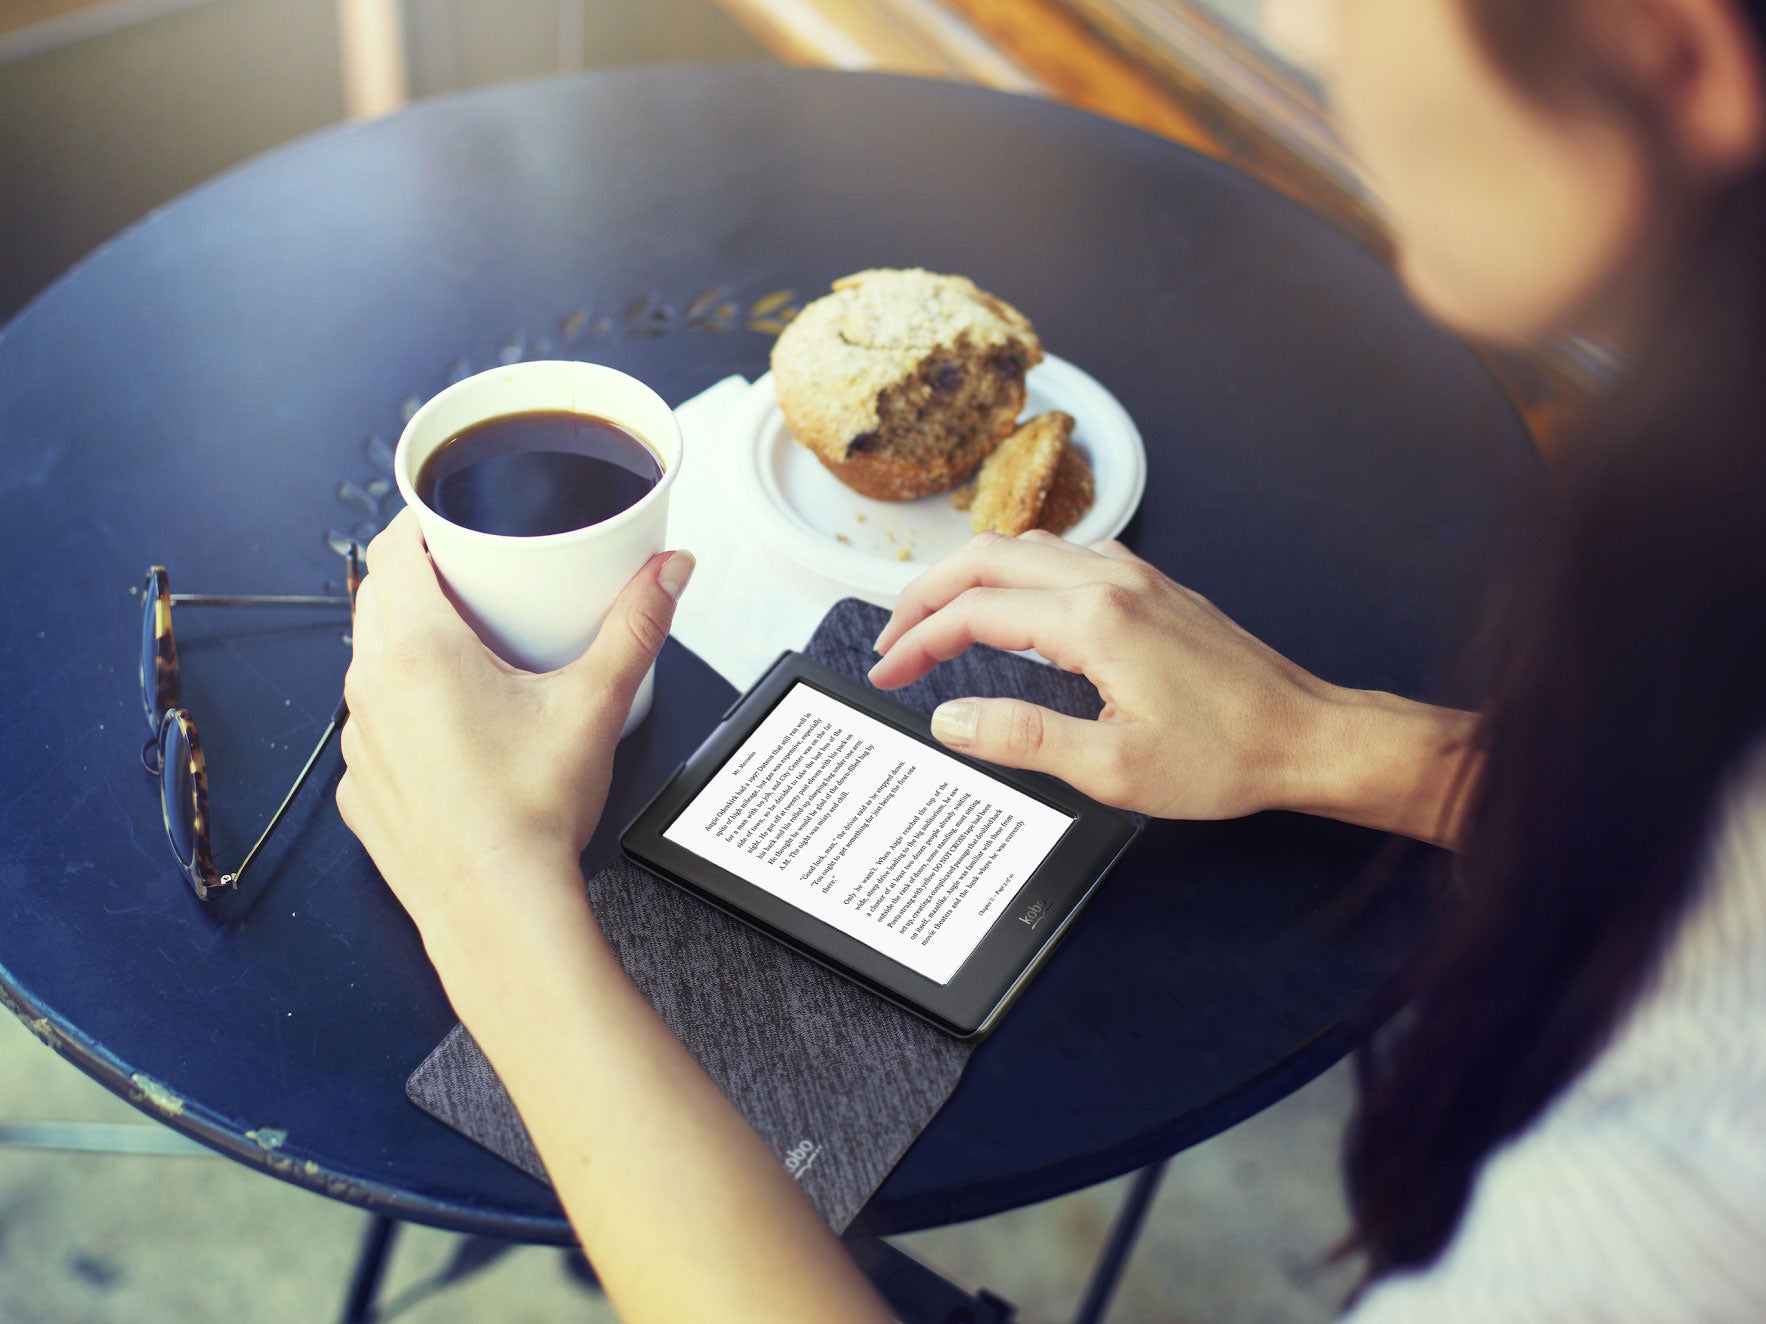 Have a coffee with your Kobo Glo HD